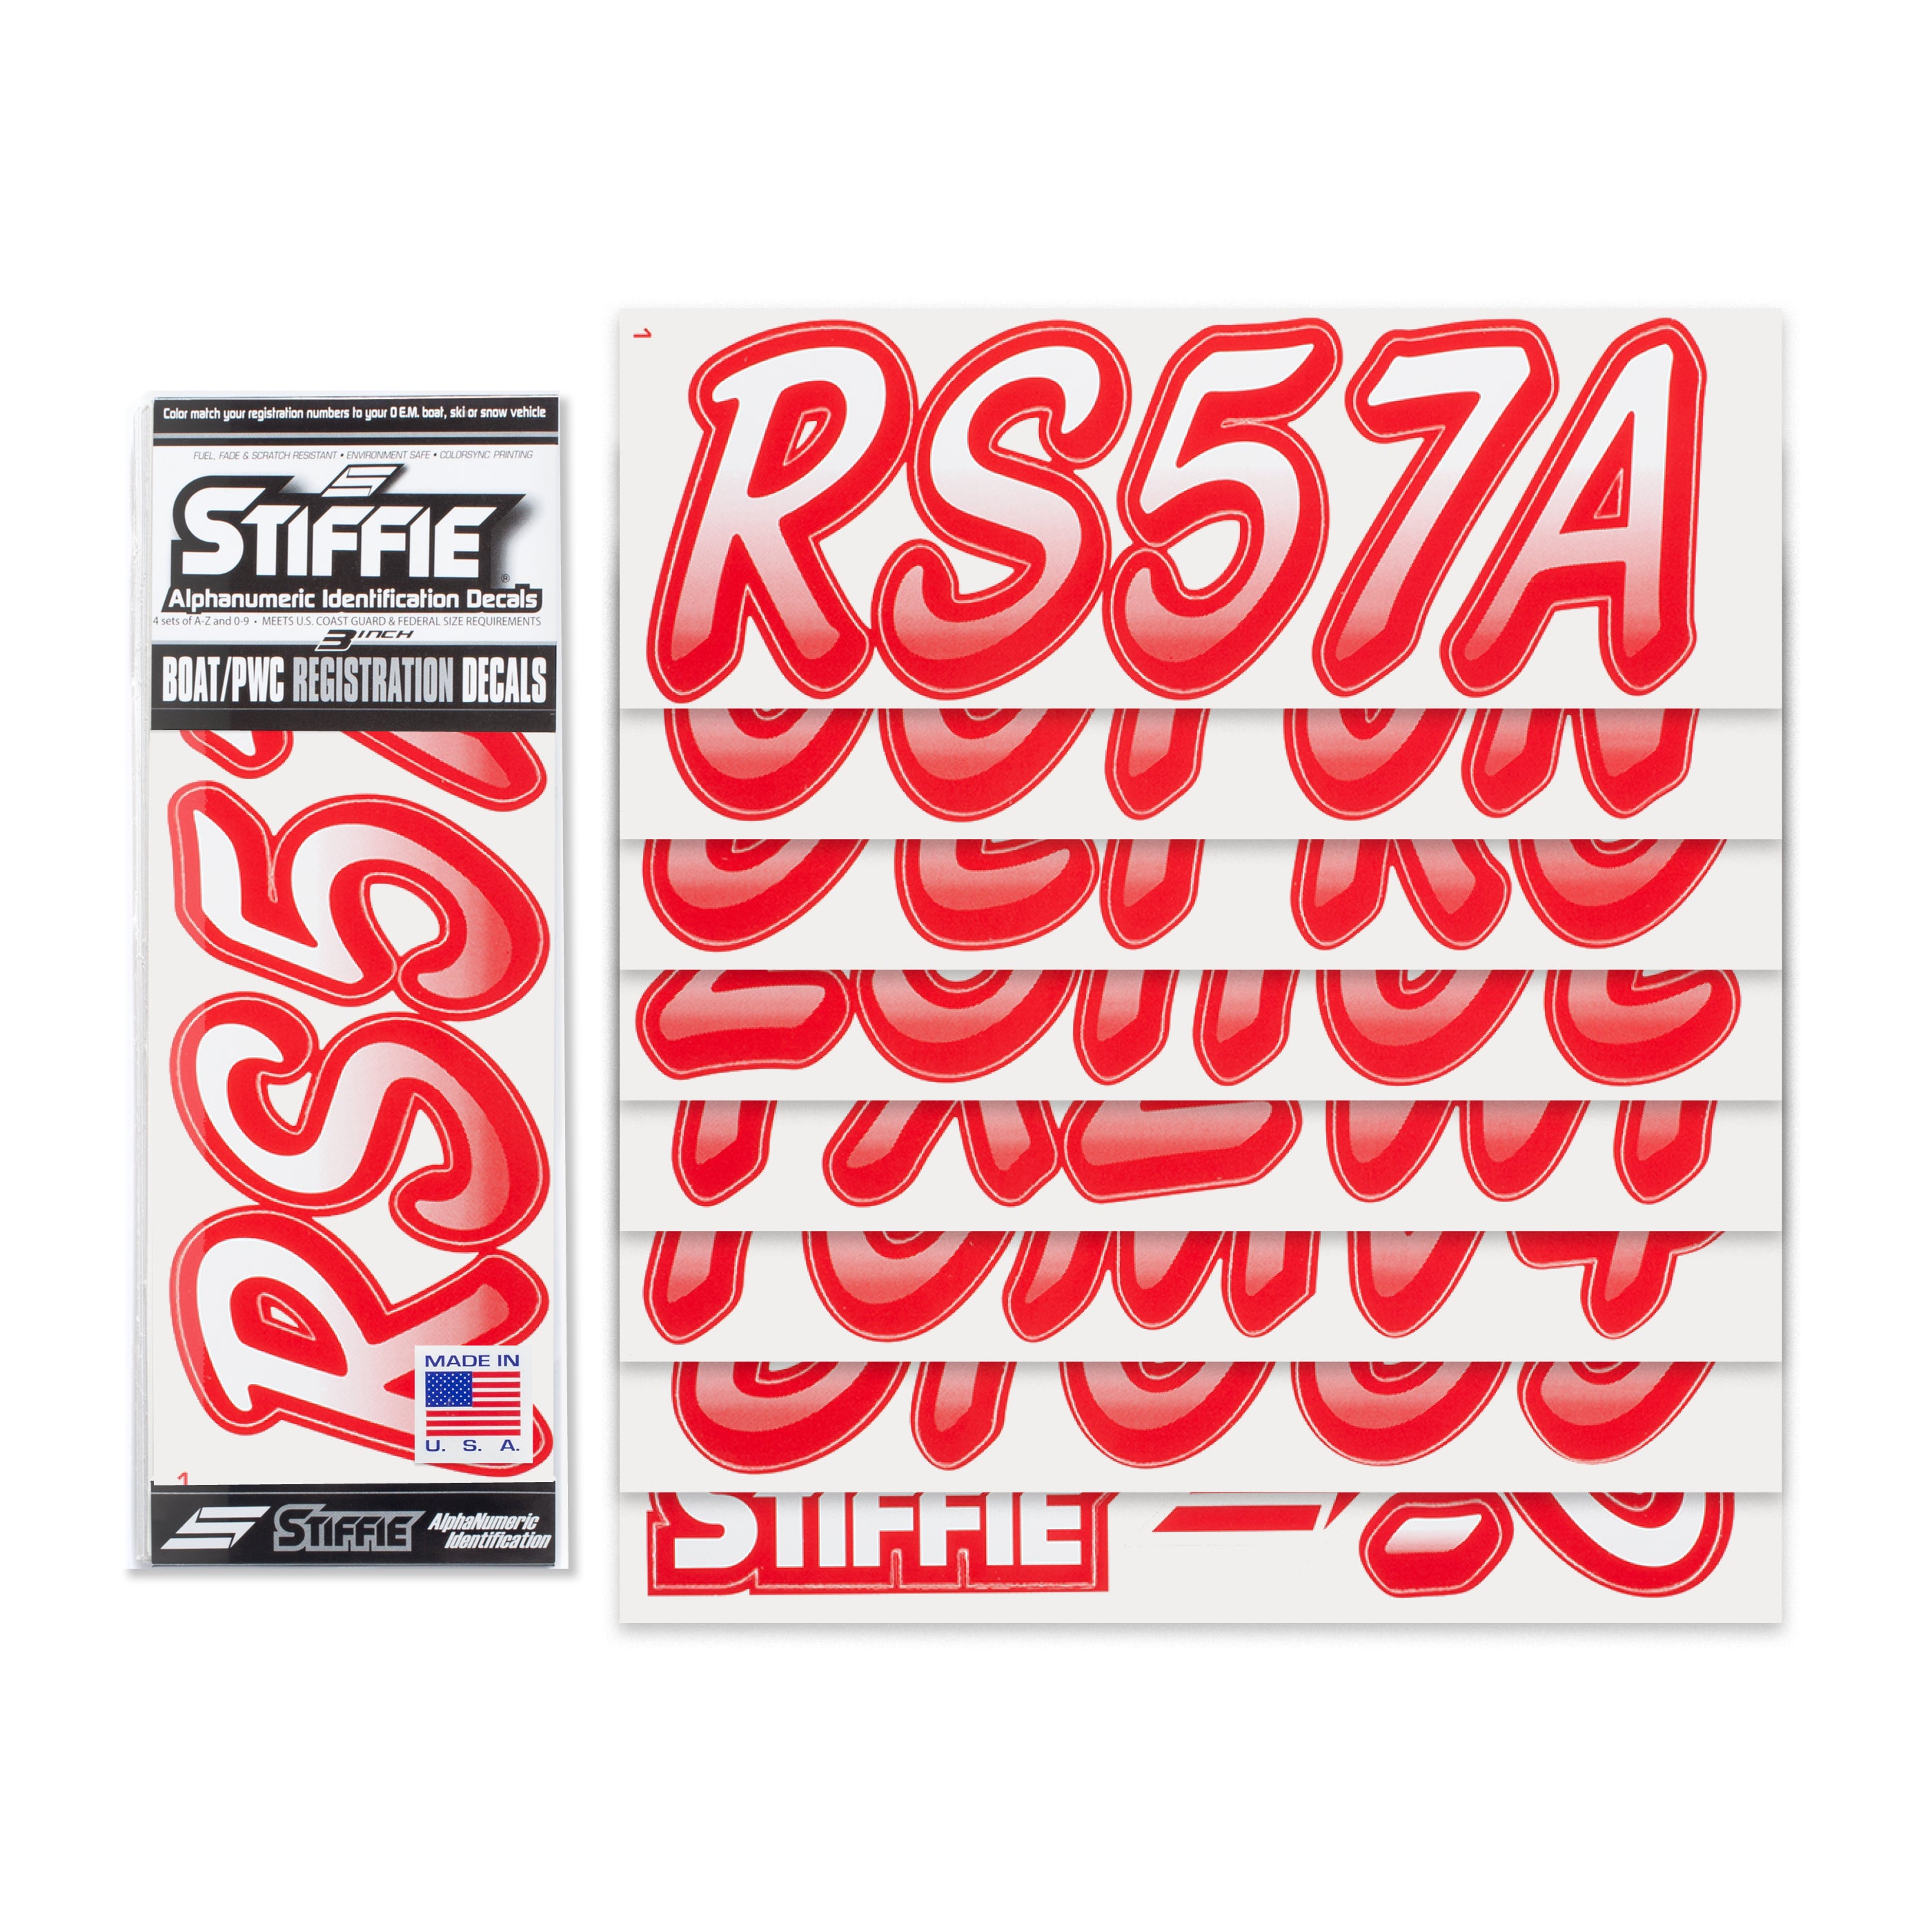 STIFFIE Whipline White/Red 3" Alpha-Numeric Registration Identification Numbers Stickers Decals for Boats & Personal Watercraft